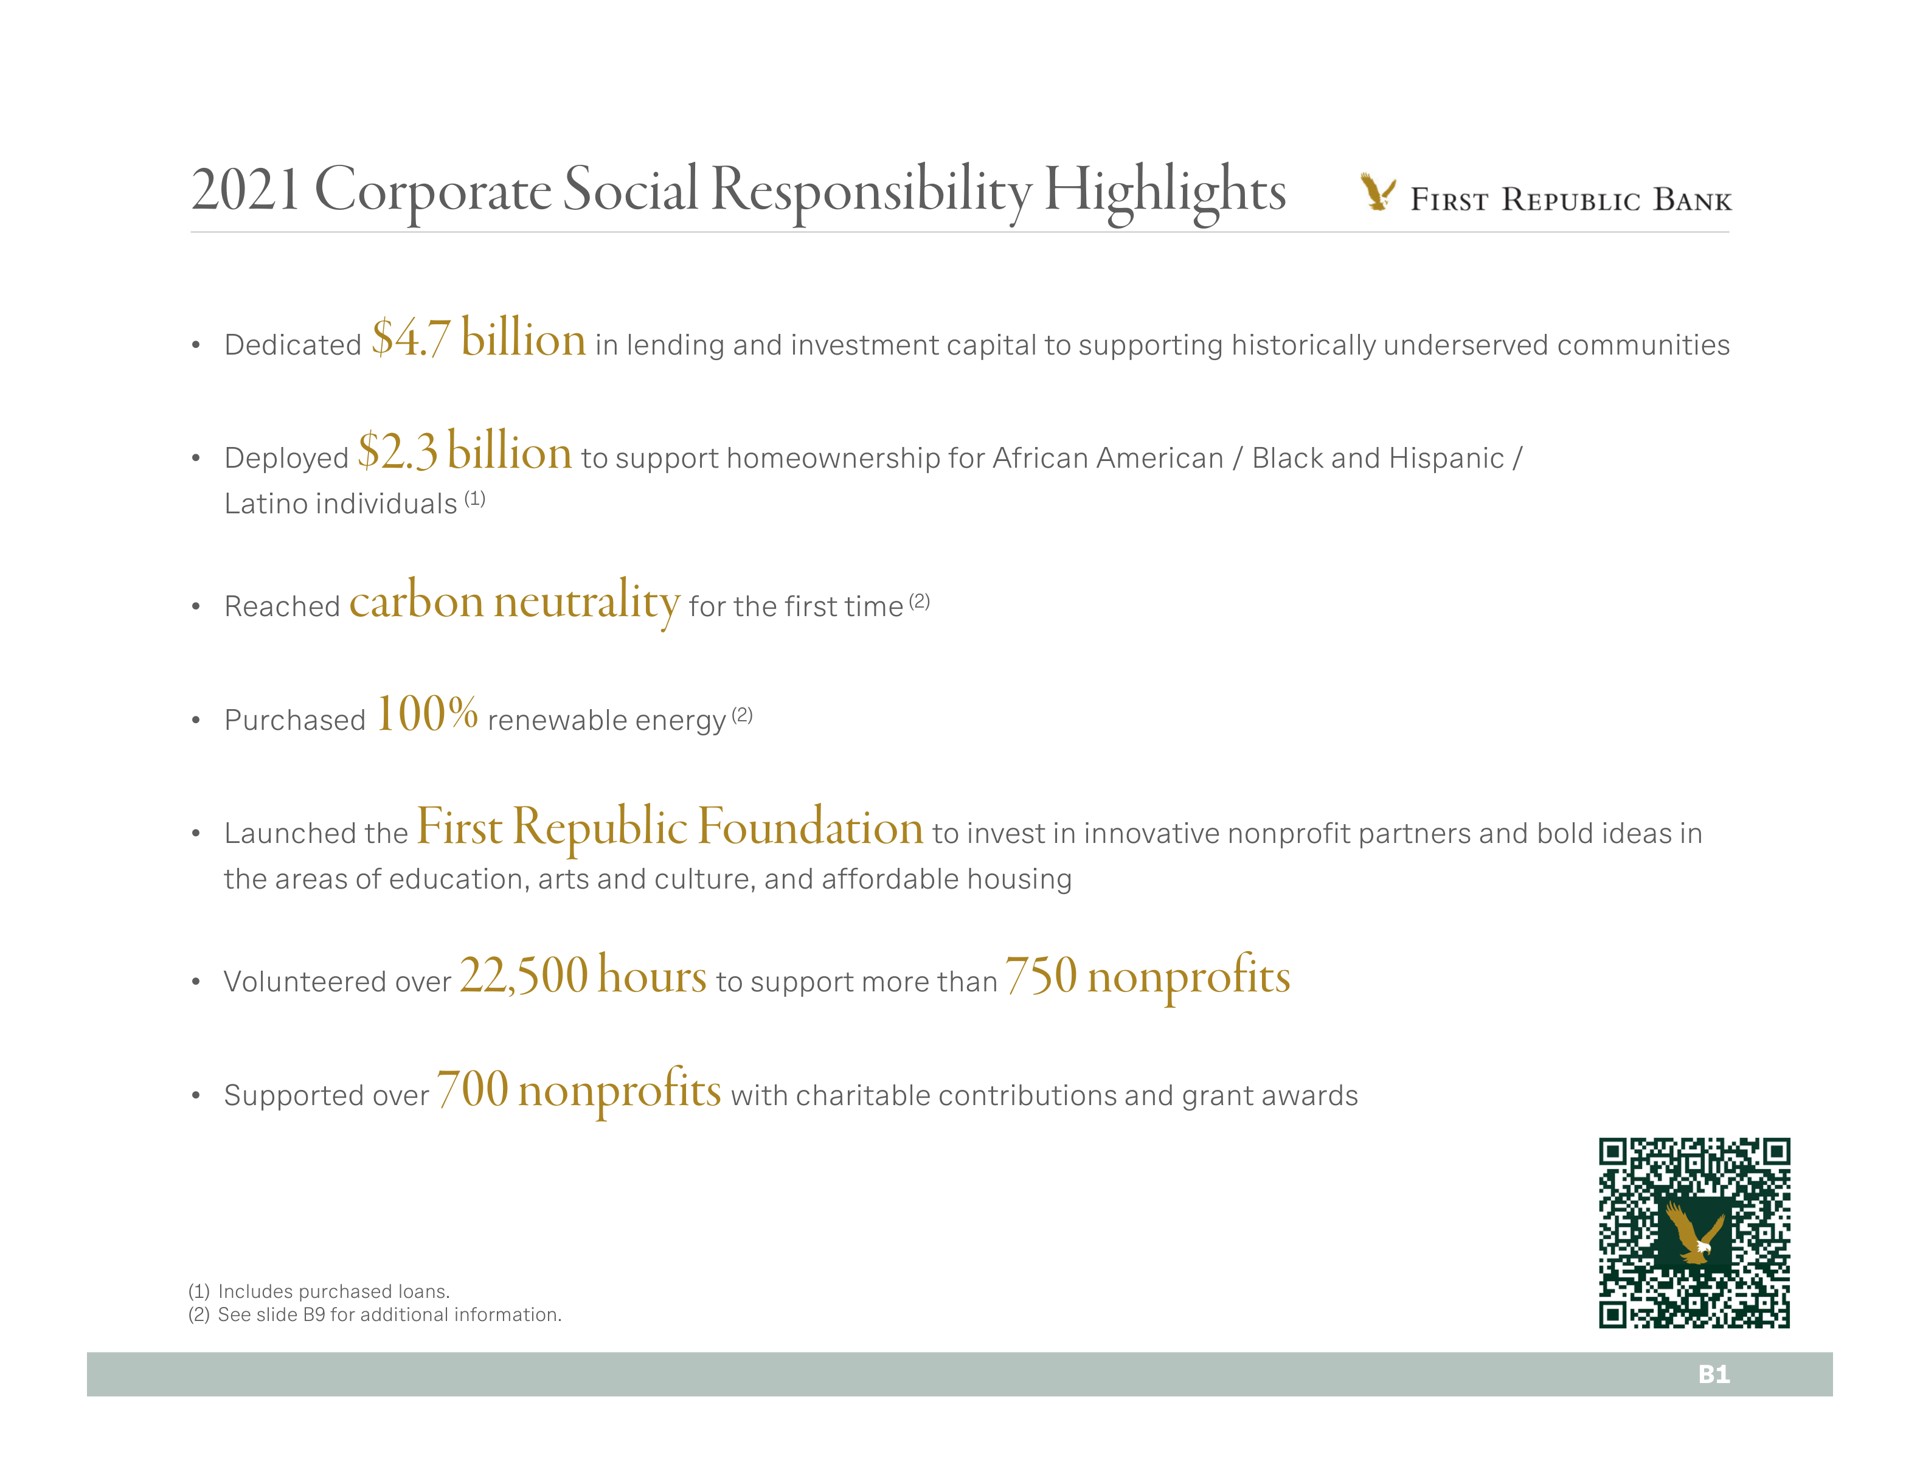 corporate social responsibility highlights first bank reached carbon neutrality for the first time | First Republic Bank